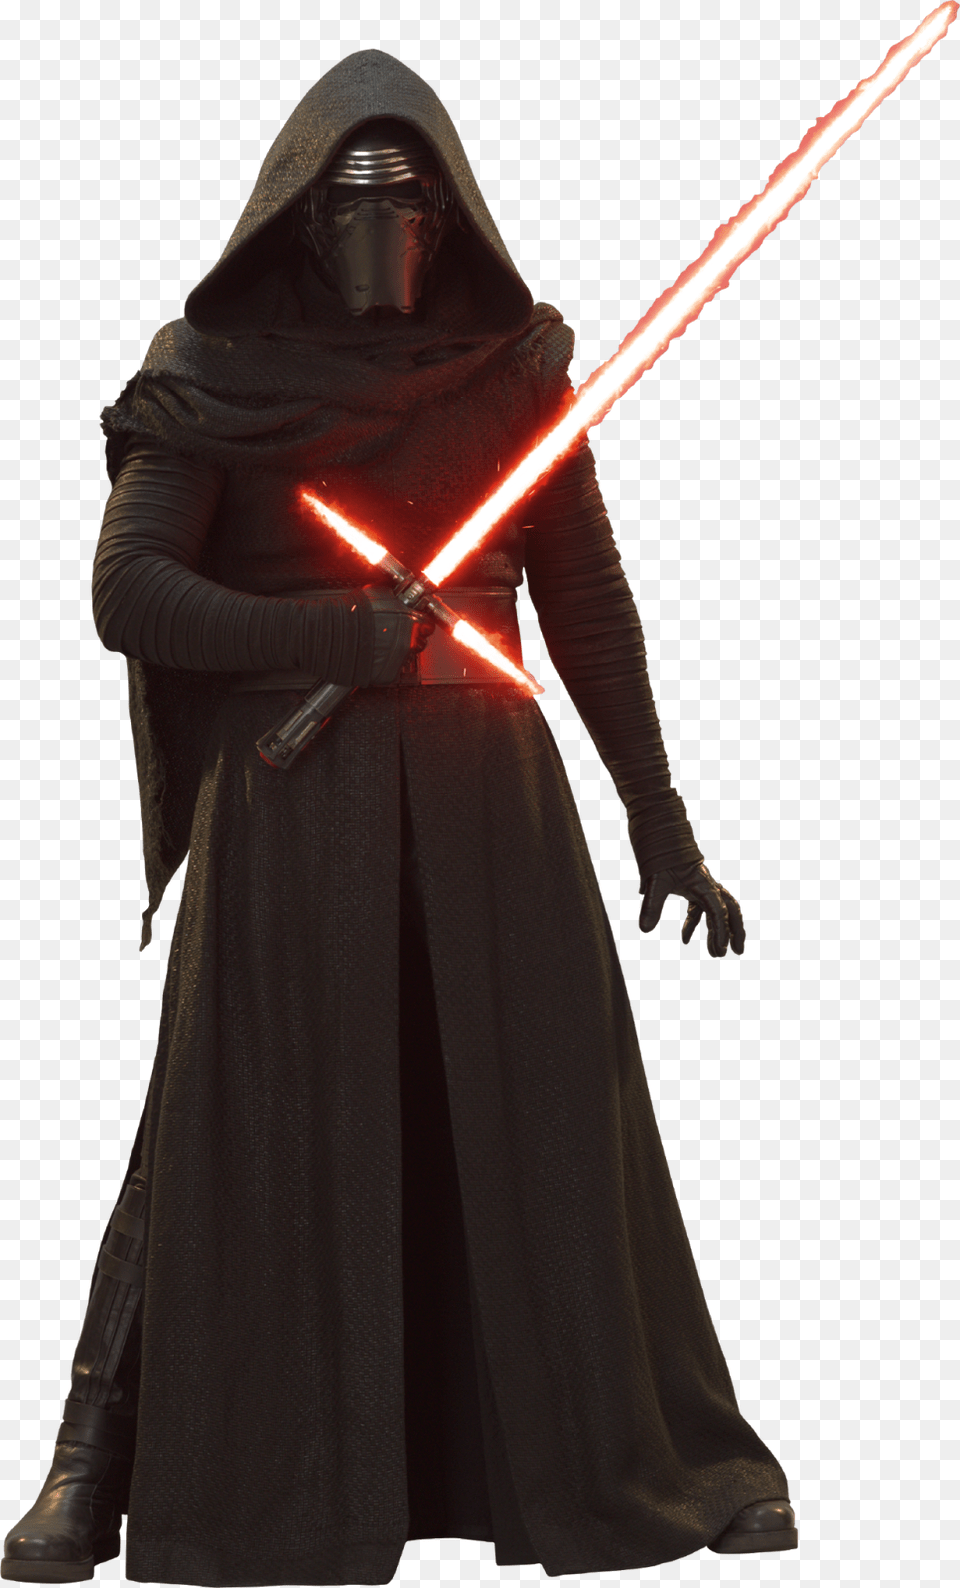 Star Wars Kylo Ren Star Wars Vii Star Wars Characters Kylo Ren Cosplay, Adult, Fashion, Female, Person Png